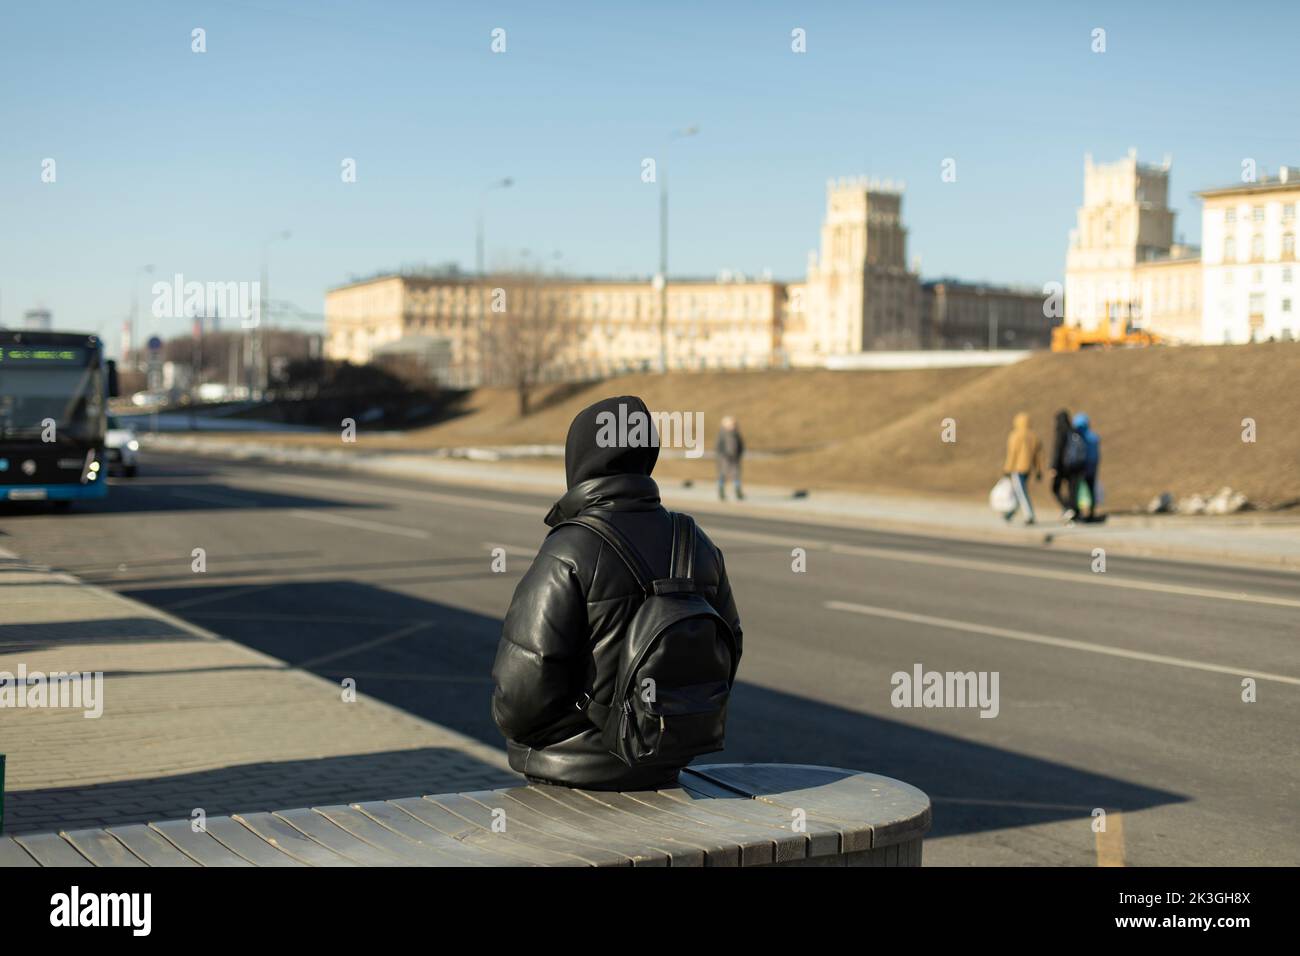 Guy is waiting for bus. Man in black clothes. Man is waiting for transport in city. Sitting on bench. Stock Photo